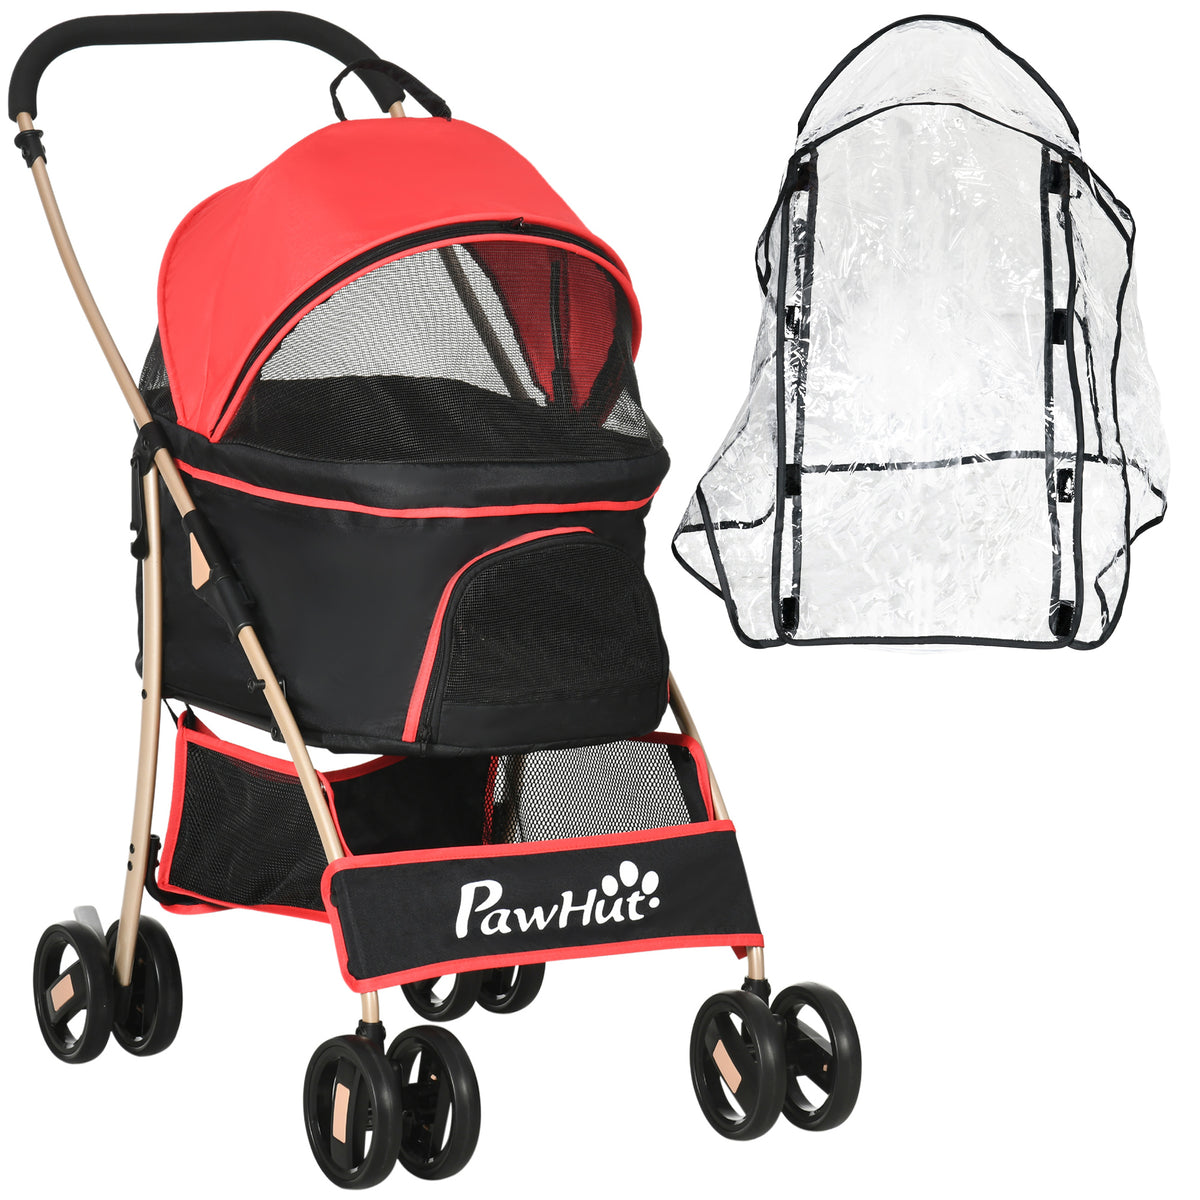 PawHut 3 In 1 Pet Stroller with Rain Cover, Detachable Cat Dog Pushchair, Foldable Carrying Bag with Universal Wheels, Brake, Canopy, Basket, Red.